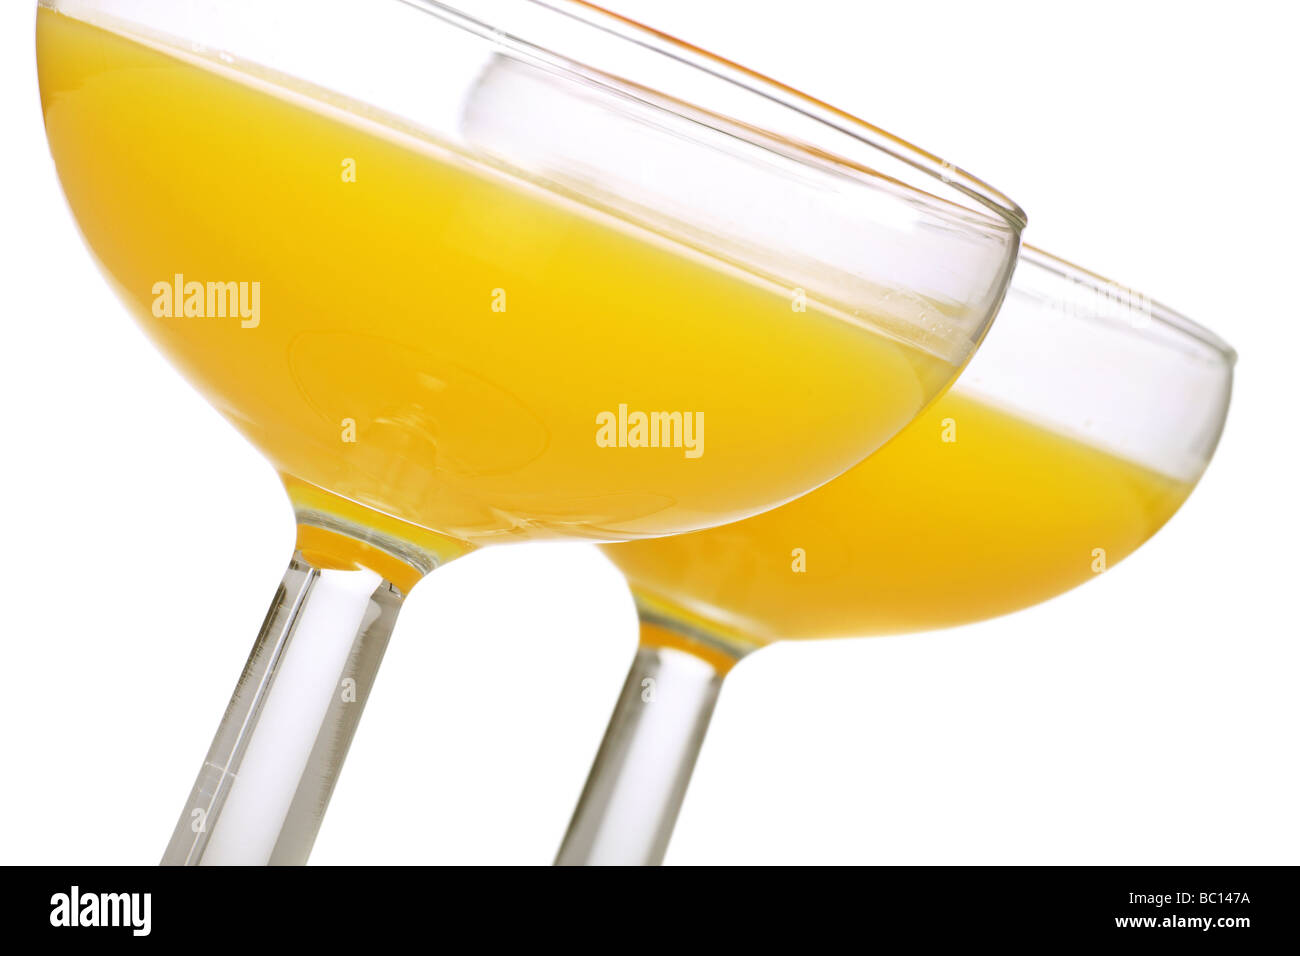 two glasses of bucks fizz served in a cocktail coupe styled glass Stock Photo